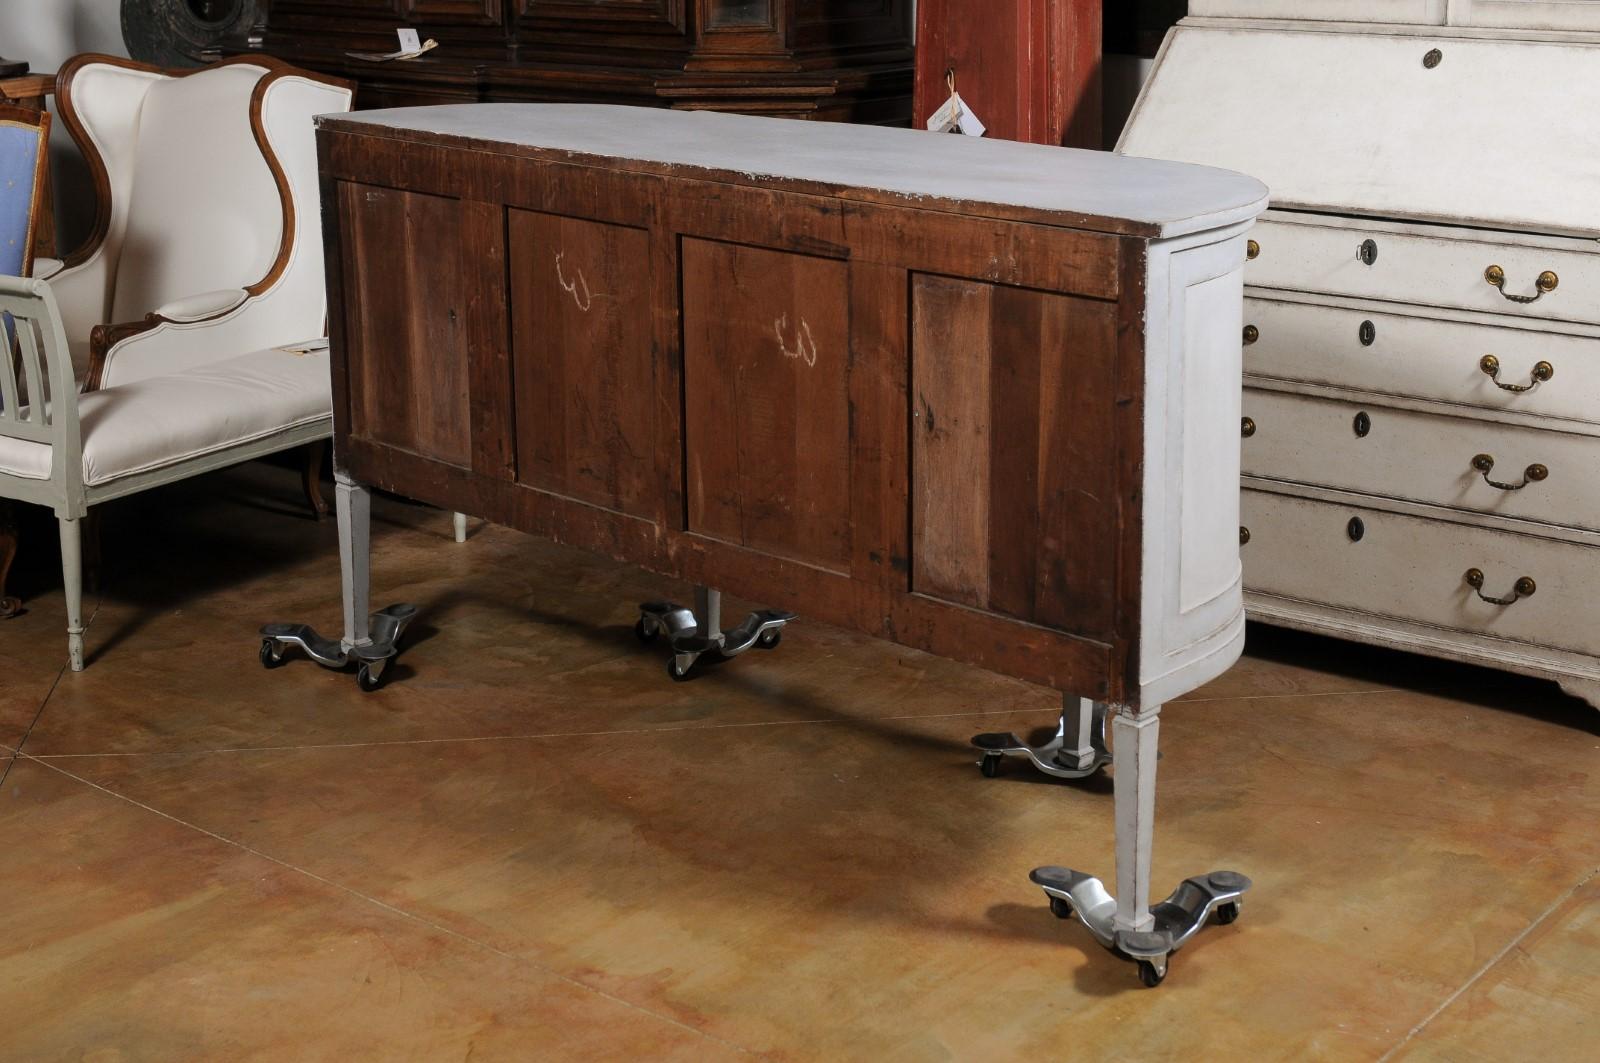 19th Century European 1830s Painted Demilune Sideboard with Three Drawers and Rounded Doors For Sale